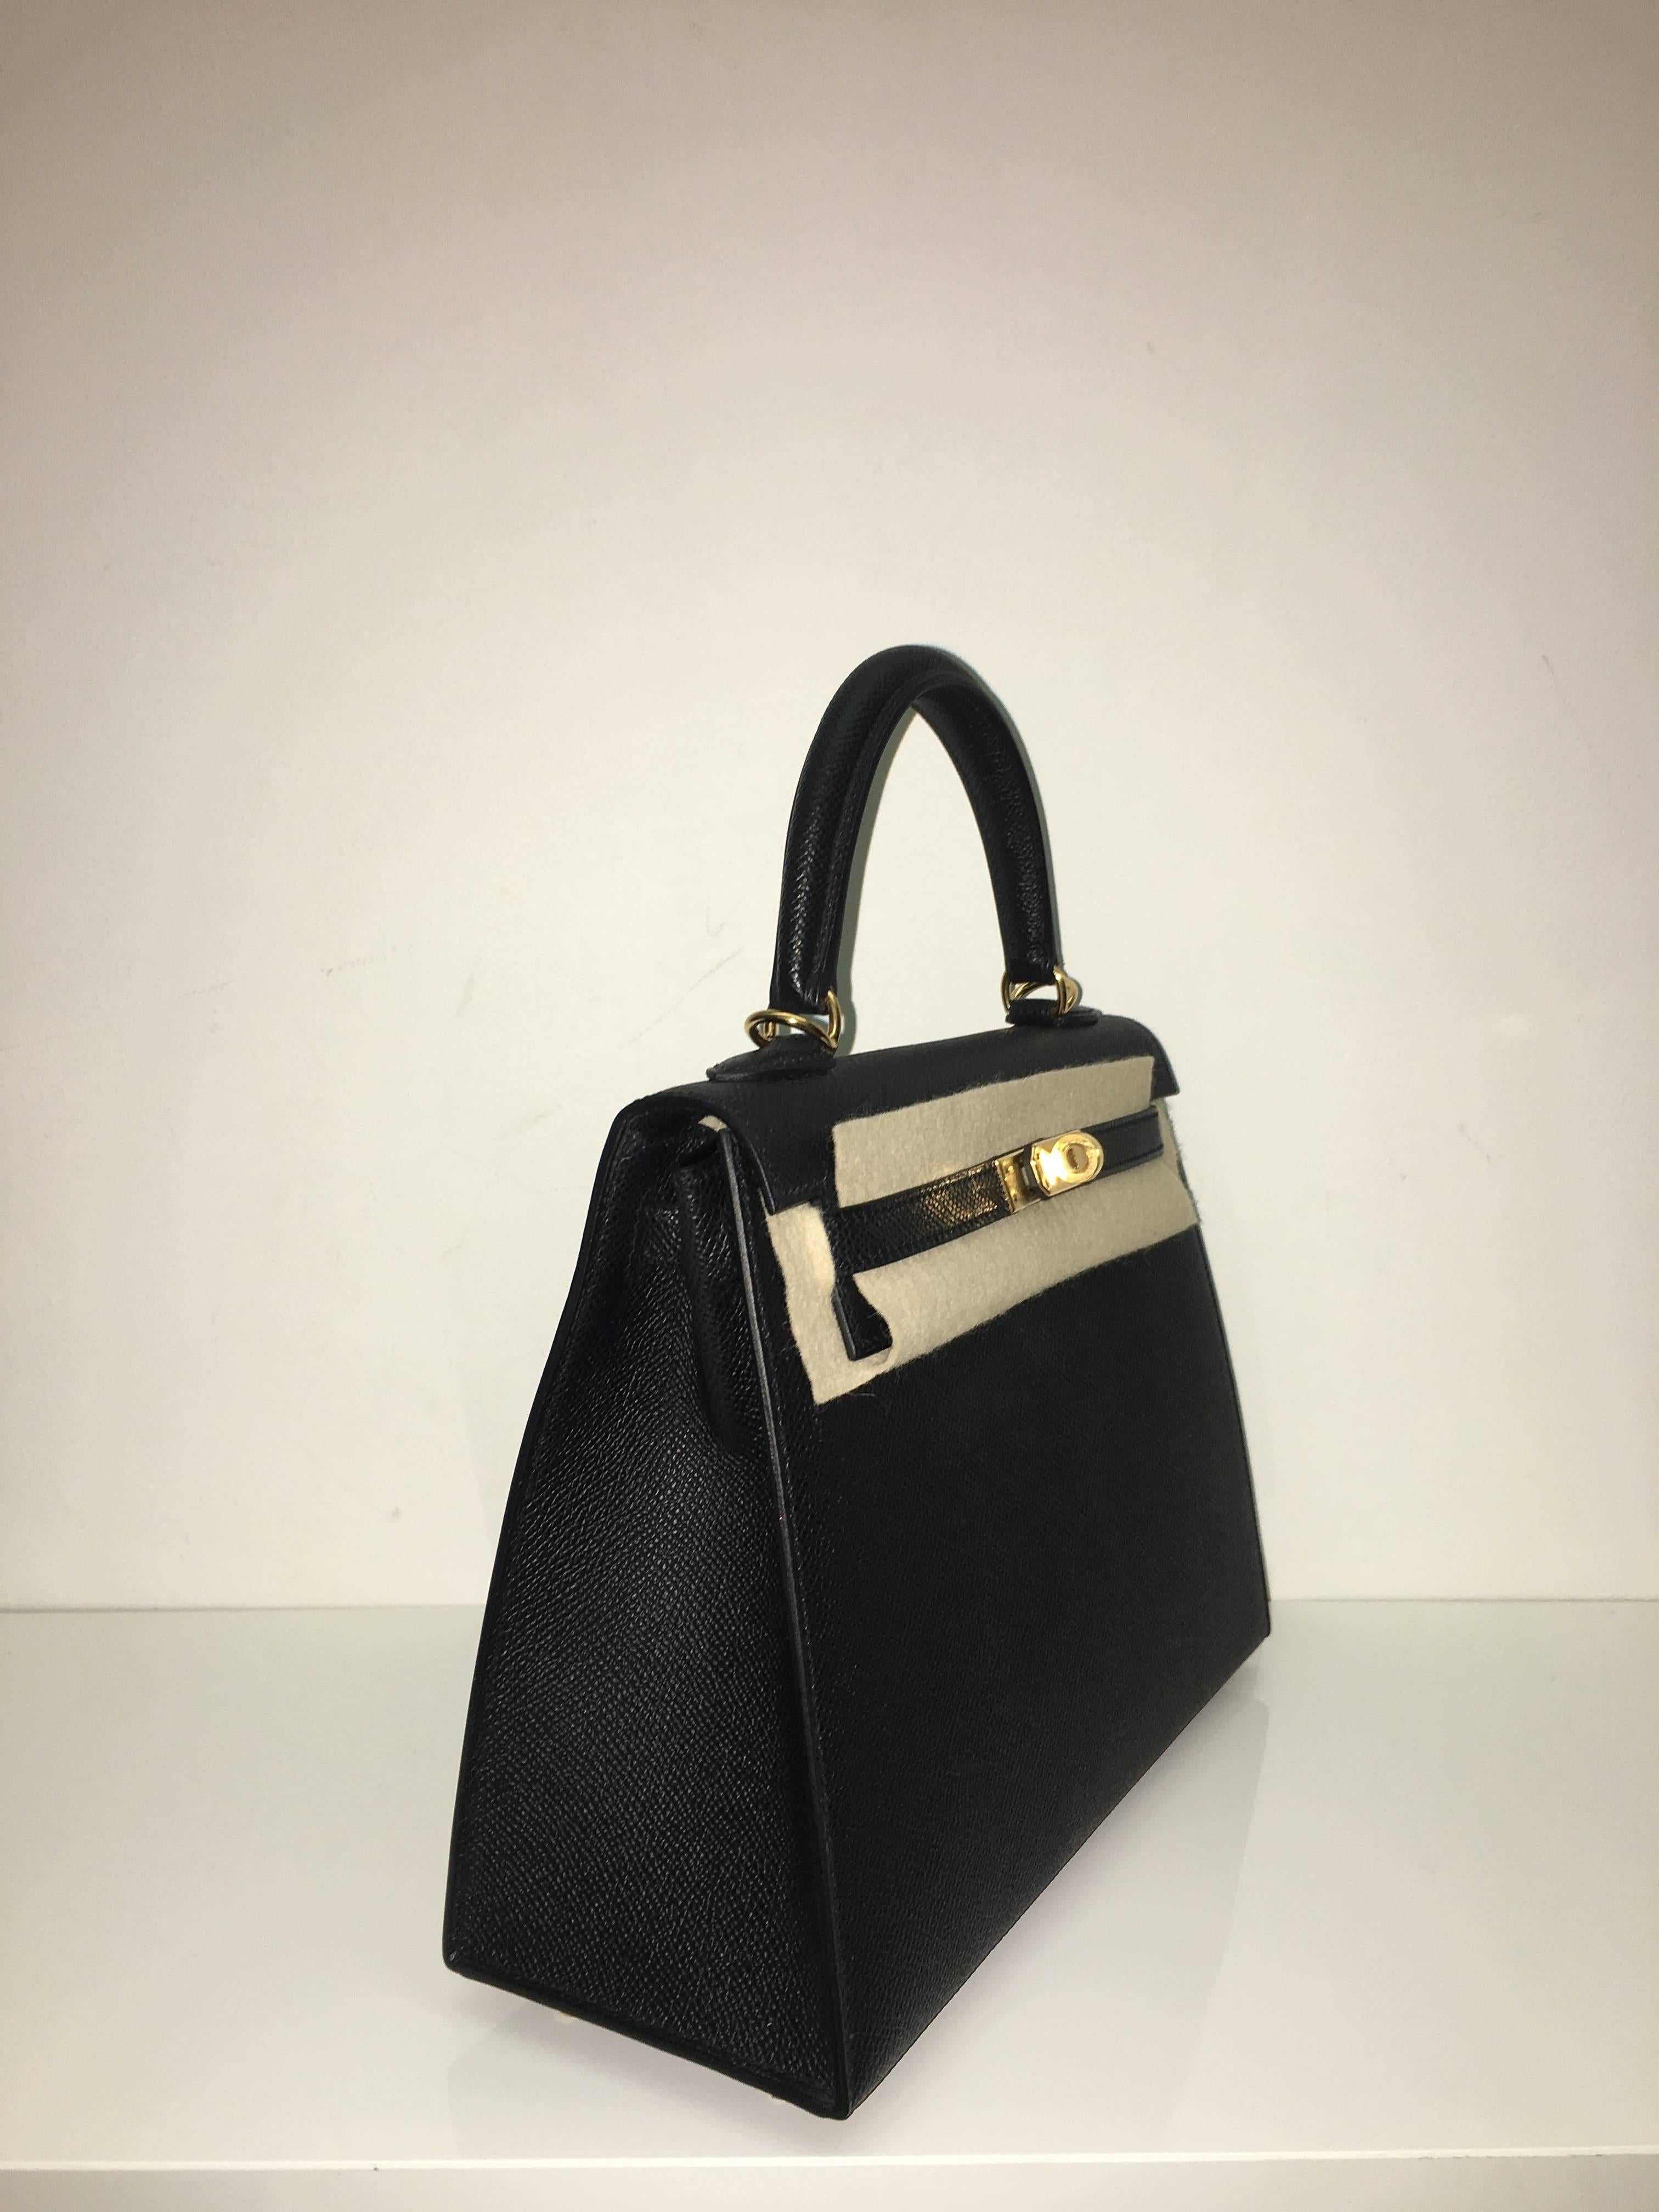 Hermes 
Kelly Size 25
Epsom Leather 
Colour Black
Gold Hardware 
store fresh, comes with receipt and full set (dust bag, box...) 
Hydeparkfashion specializes in sourcing and delivering authentic luxury handbags, mainly Hermes, to client around